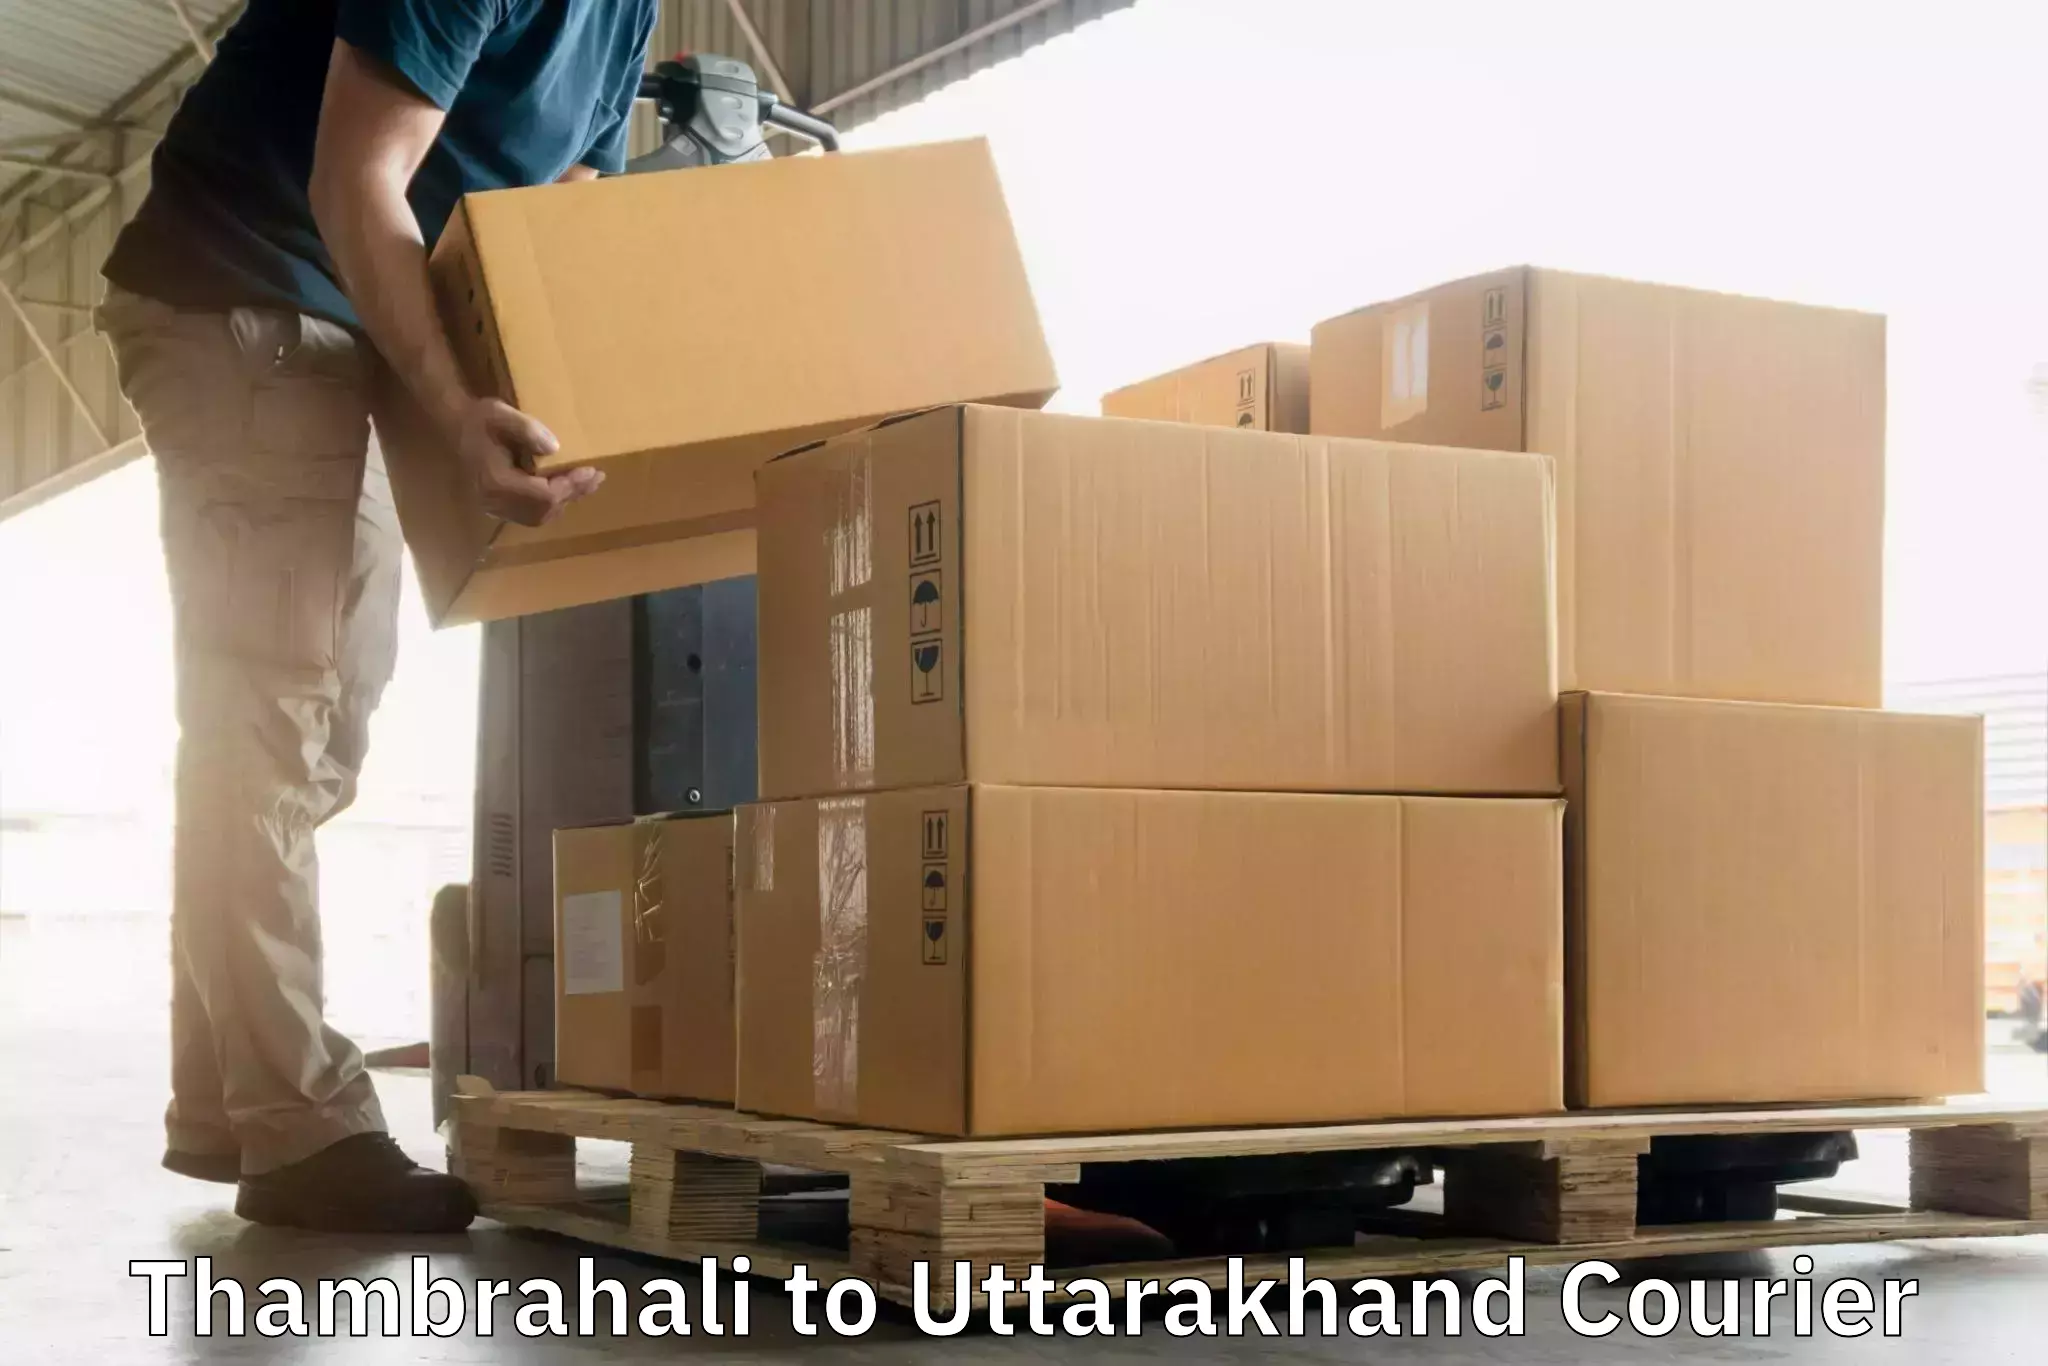 Parcel service for businesses Thambrahali to Joshimath